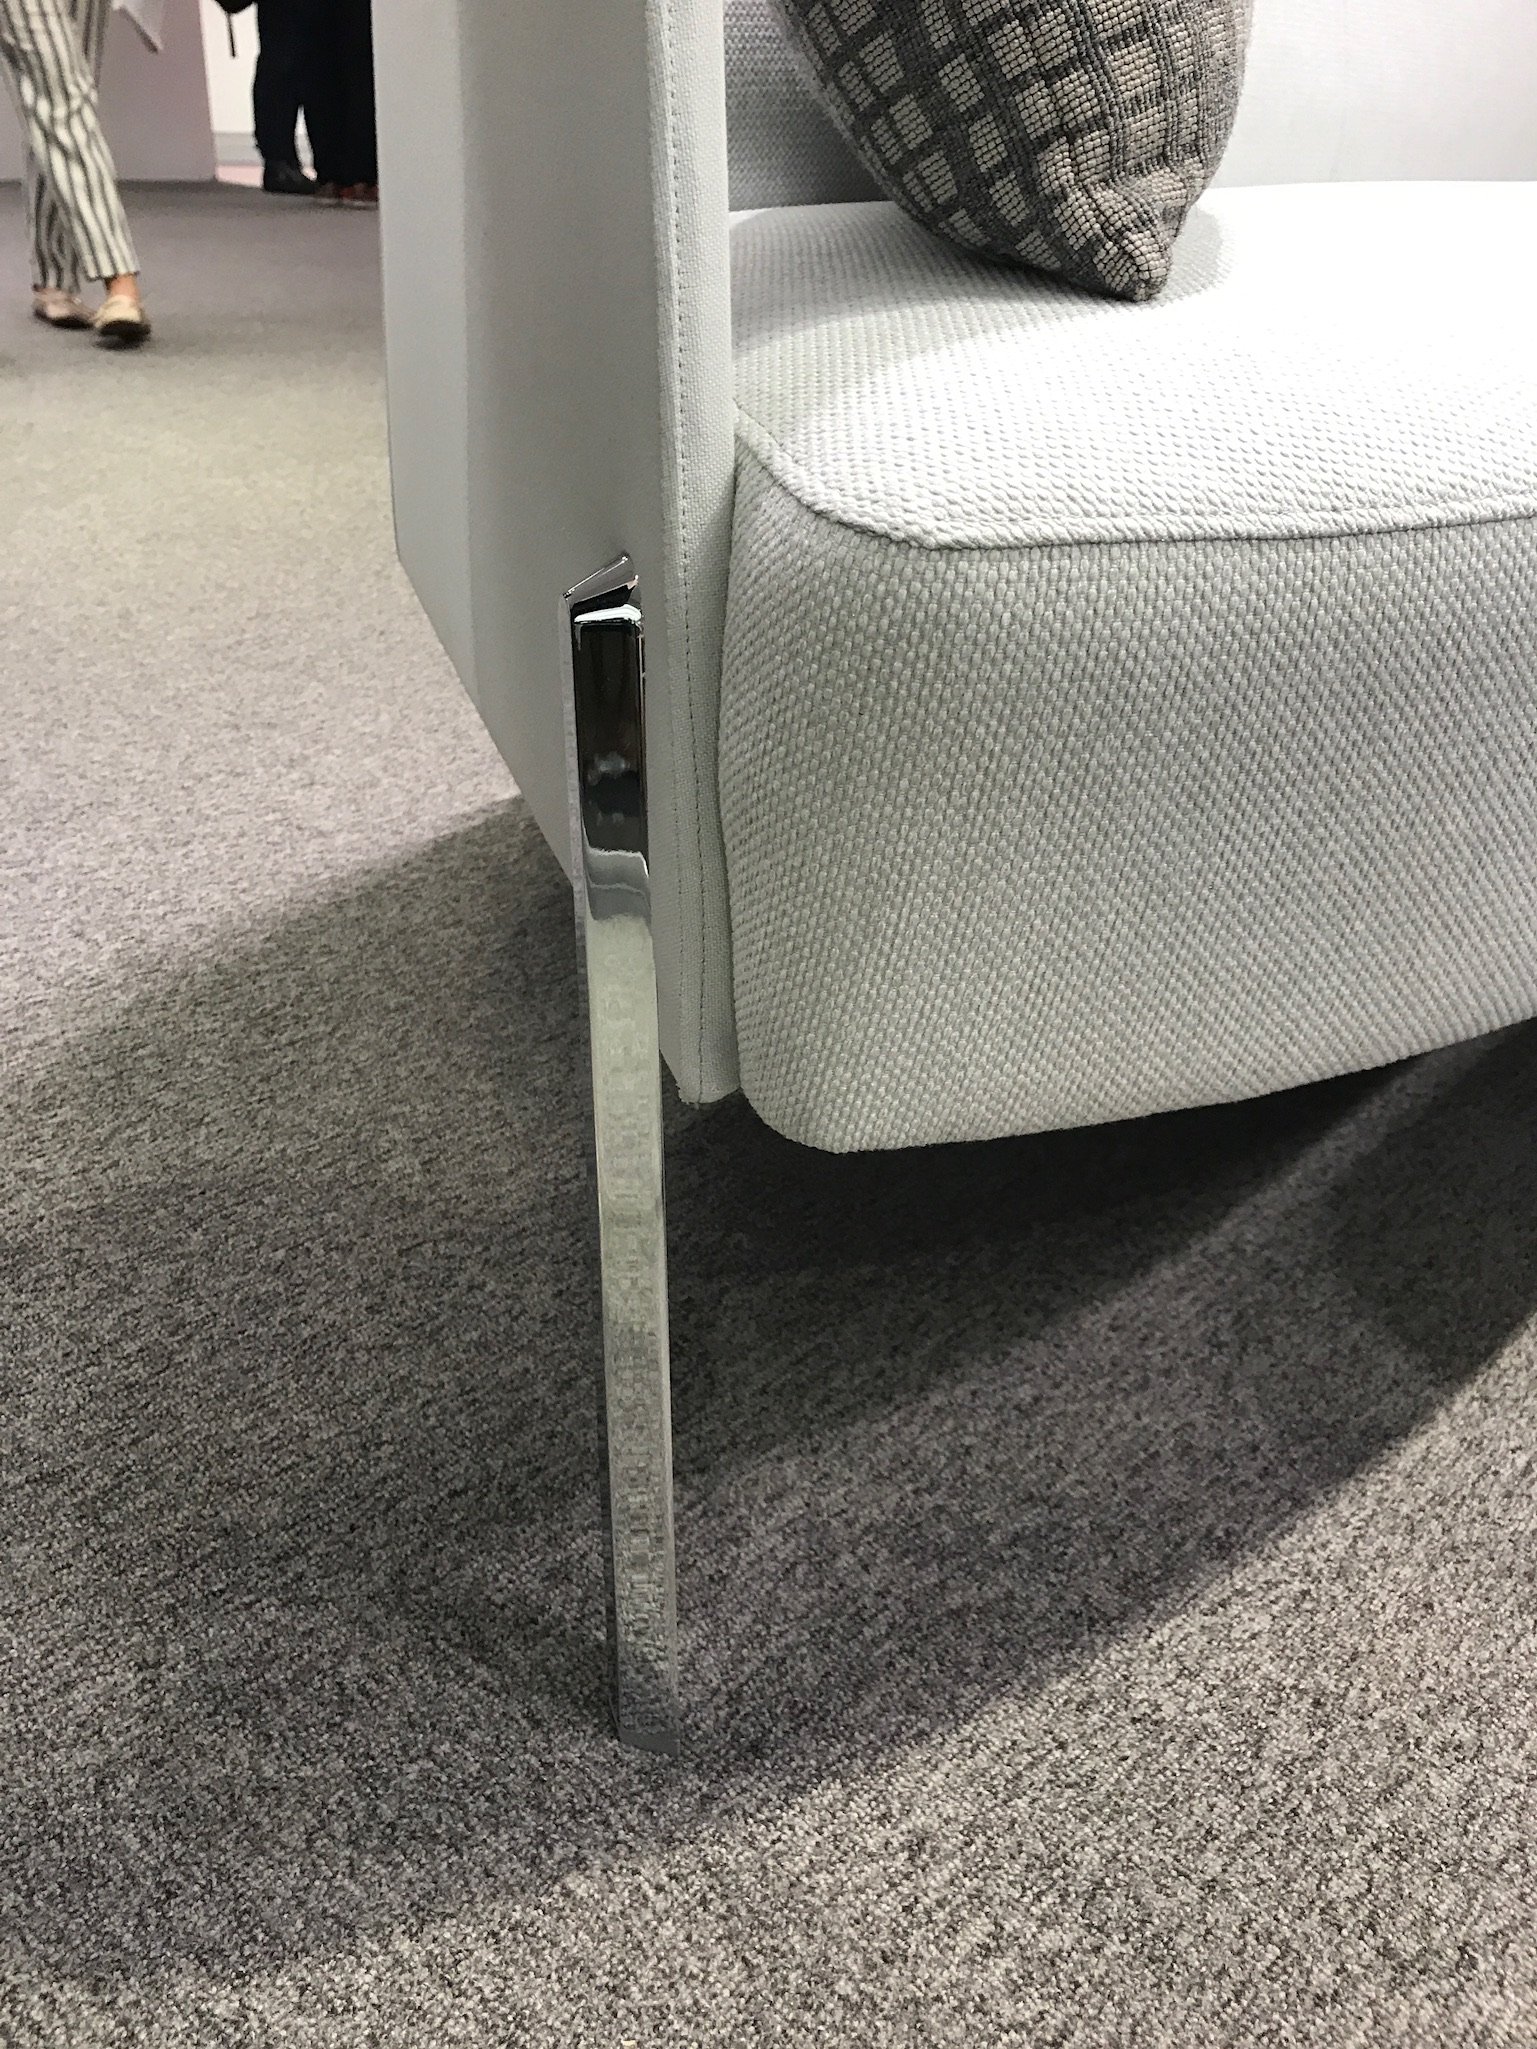 5 Trends We Saw at NeoCon 2018 from Unisource Solutions - 4. textured fabric